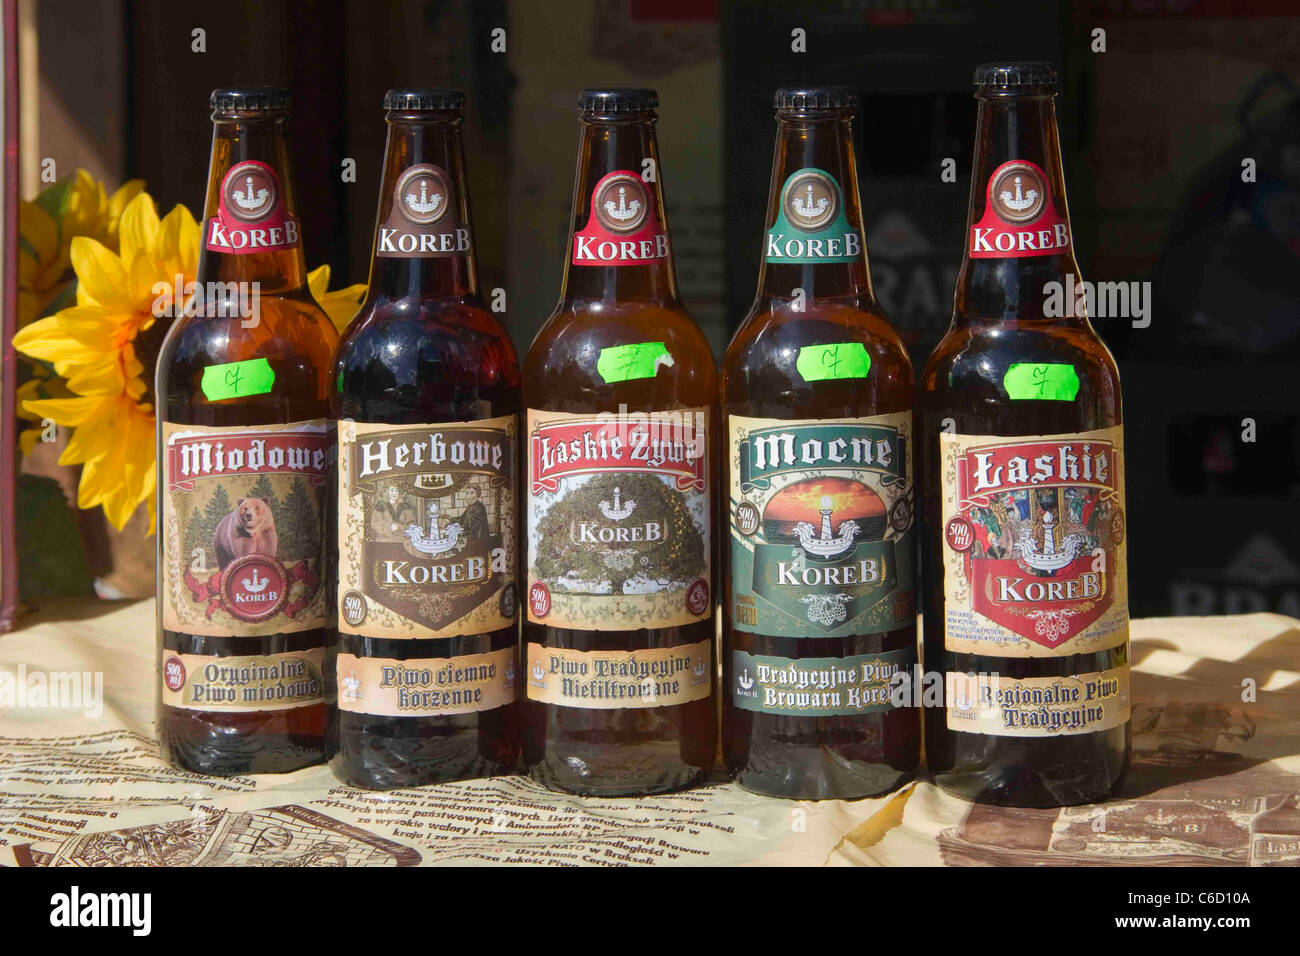 Local beers display at a fair in Gdansk Pomerania Poland EU Stock Photo -  Alamy